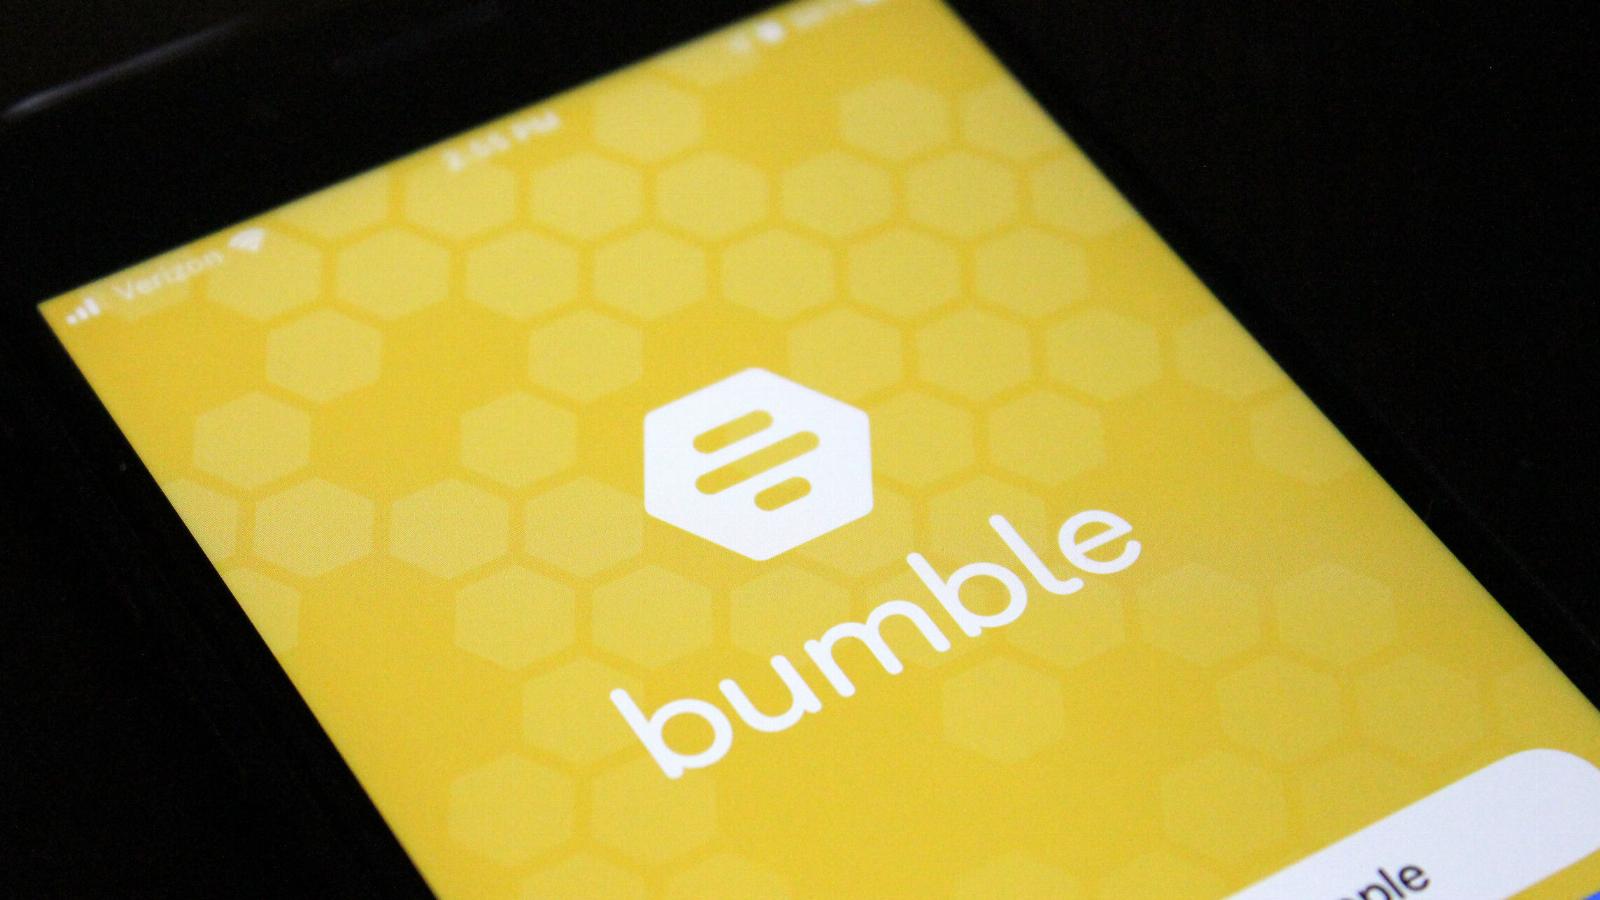 Bumble changes its policy to crack down on bots, ghosting, and doxing